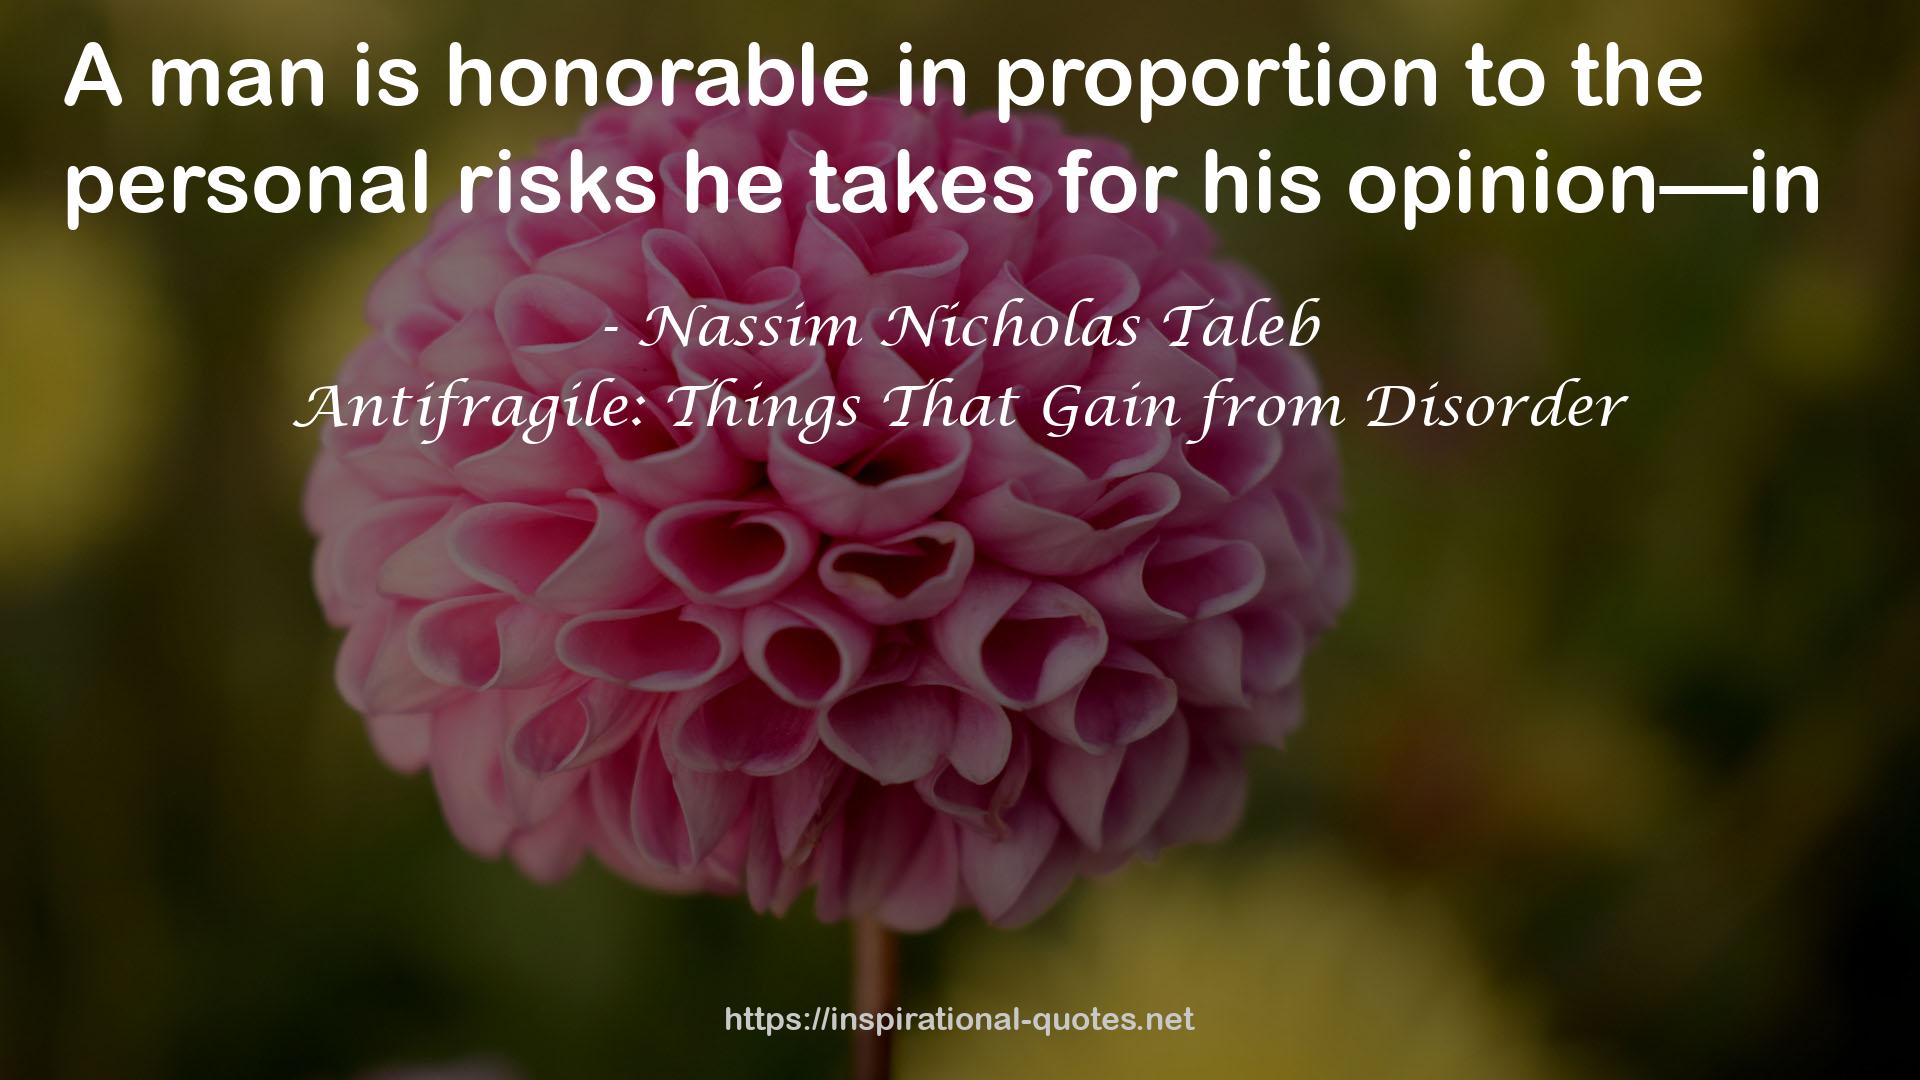 Antifragile: Things That Gain from Disorder QUOTES